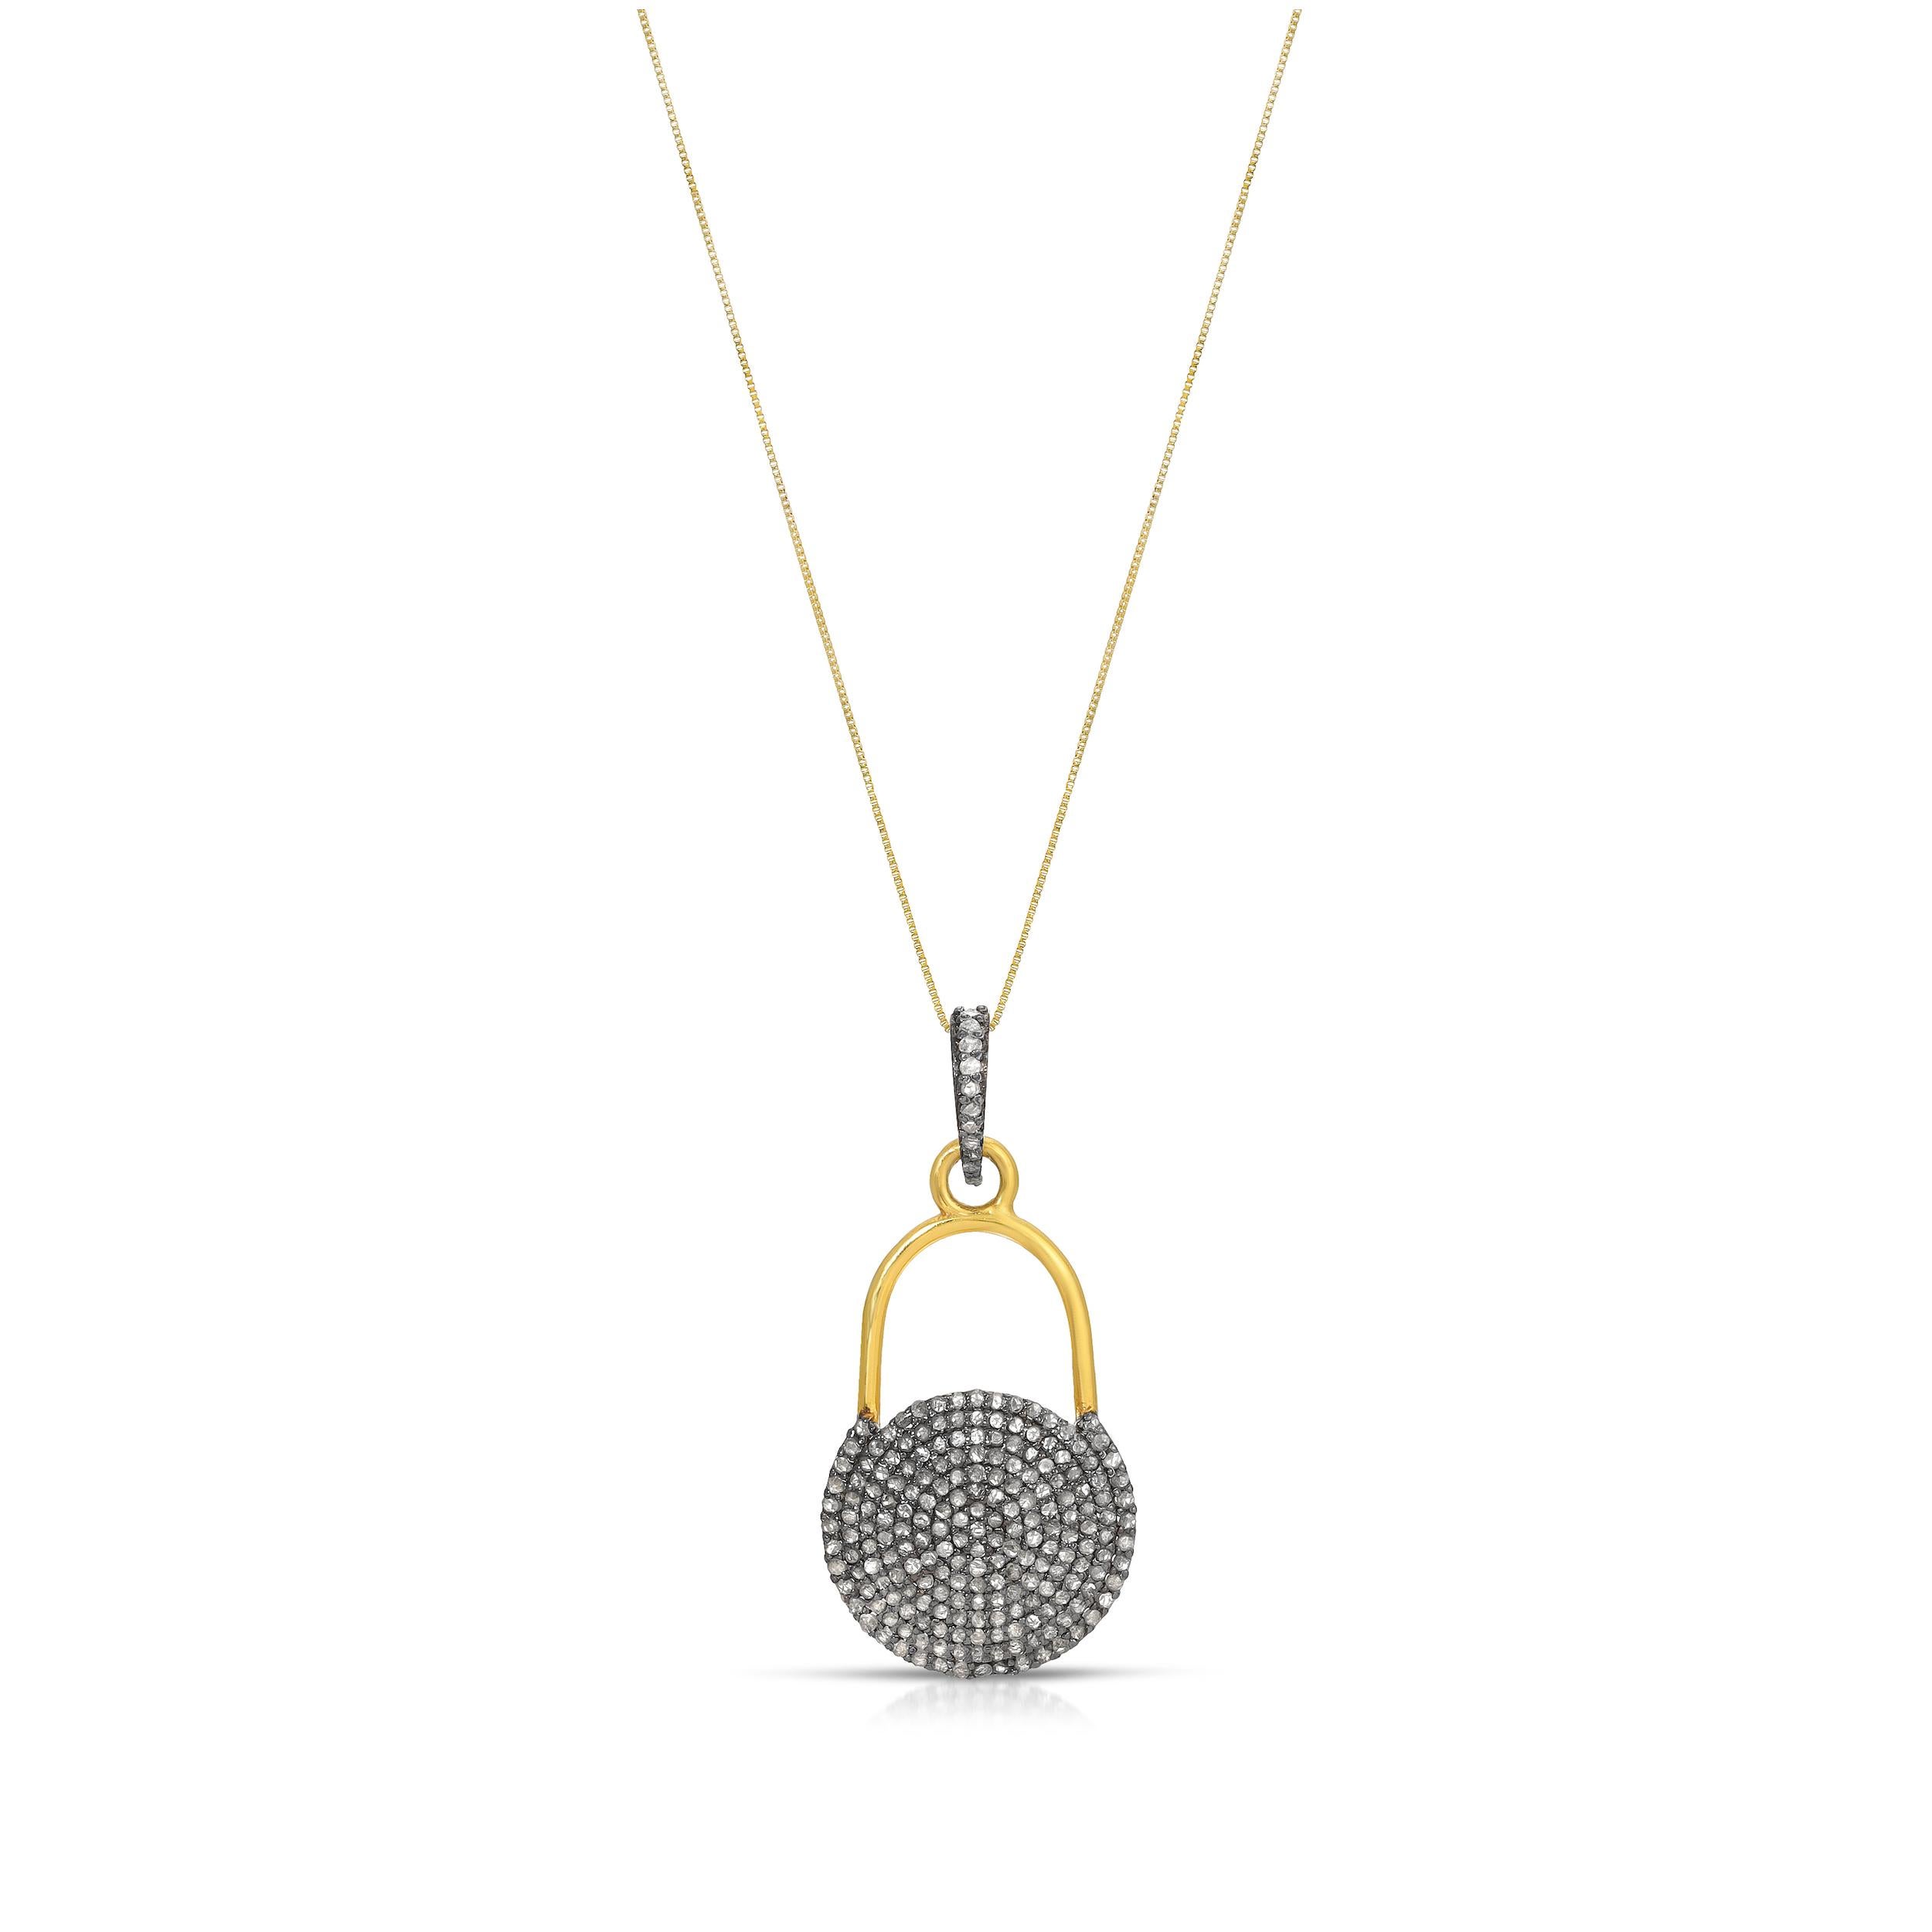 A fabulous diamond pendant featuring a diamond set link suspending a diamond cirque pendant with. This pendant features contrasting 18 Karat Gold overlay and silver accents in a contemporary locket design on an 18 inch 14 Karat fine gold chain.